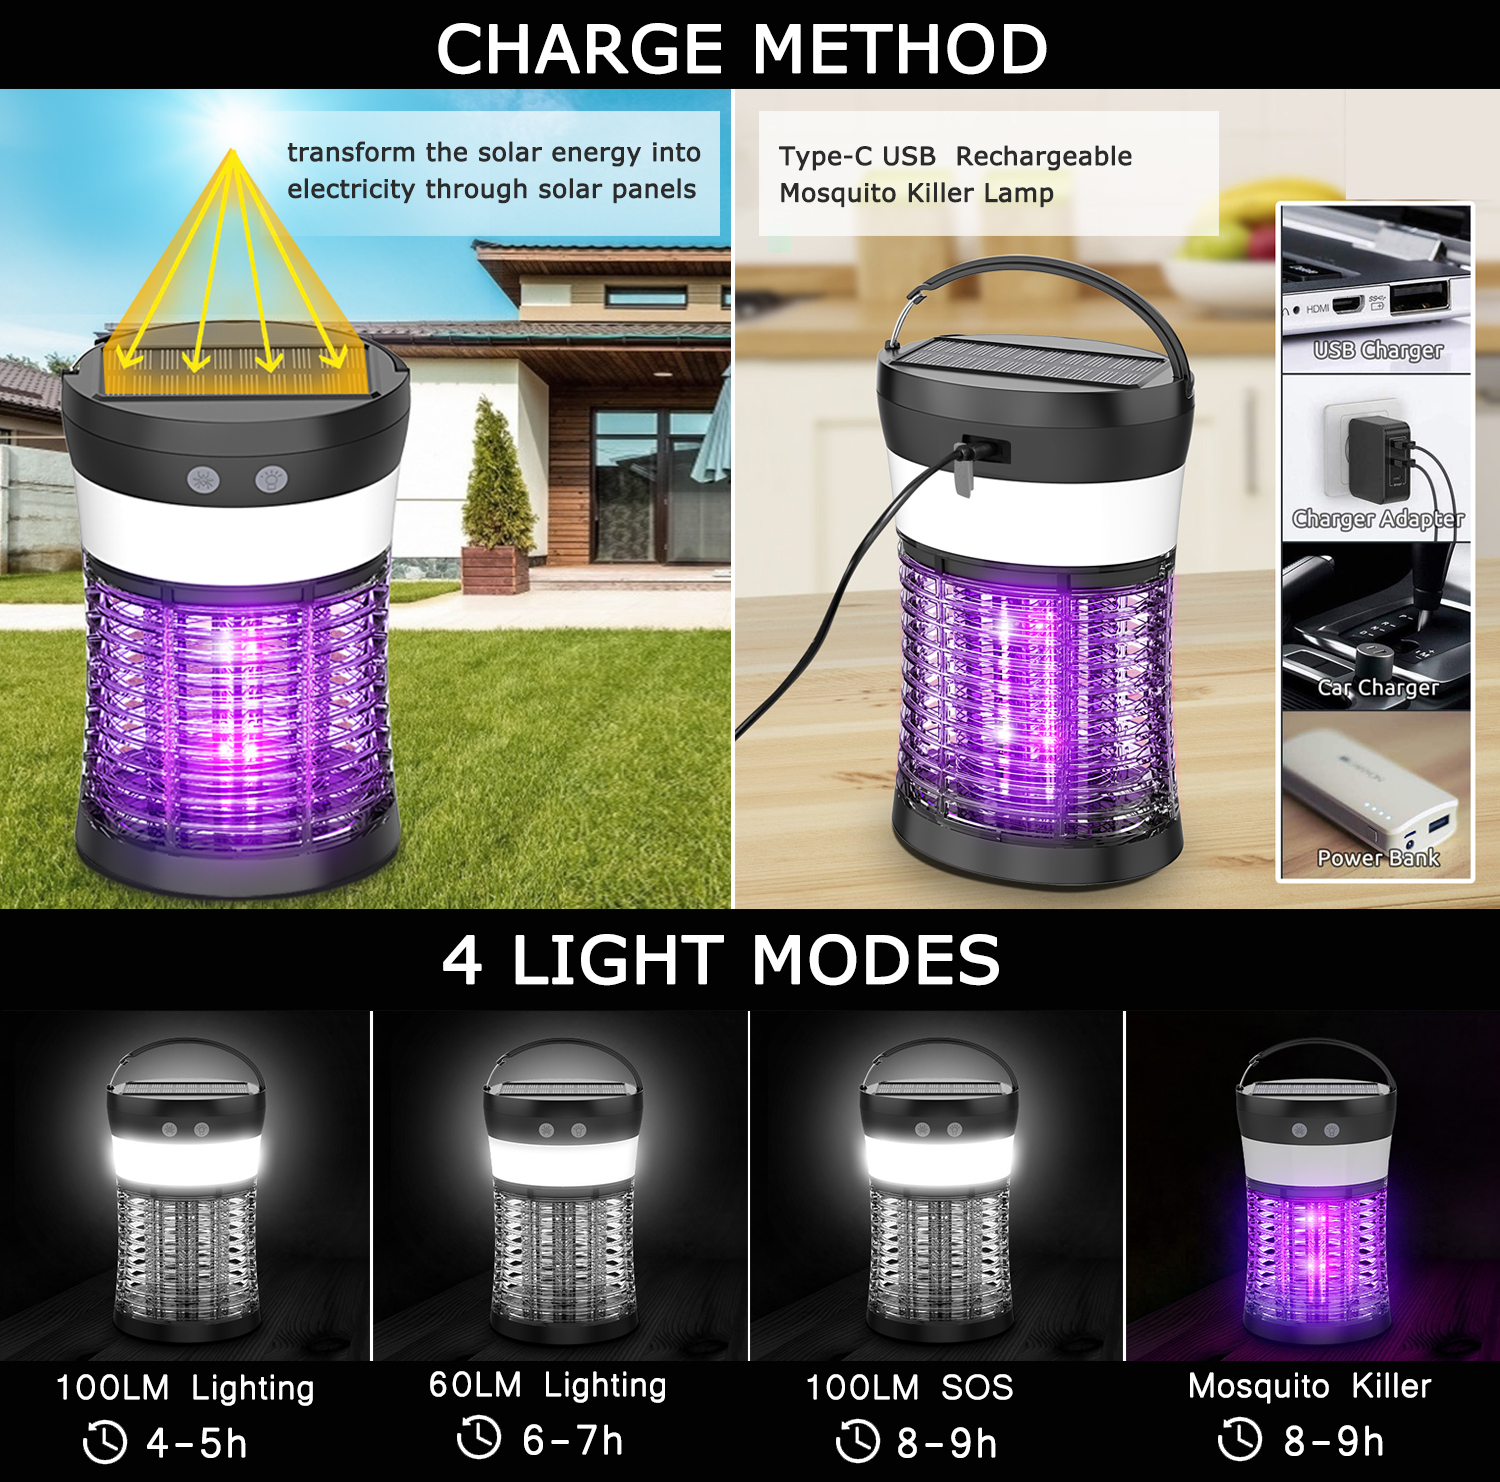 Bug Zapper for Outdoor and Indoor, Electric Mosquito Zappers Killer - Insect Fly Trap,Waterproof Powered Mosquito Lamp with 3 Lighting Modes,USB Type C Solar Charging for Home,Hiking,Backyard,Patio